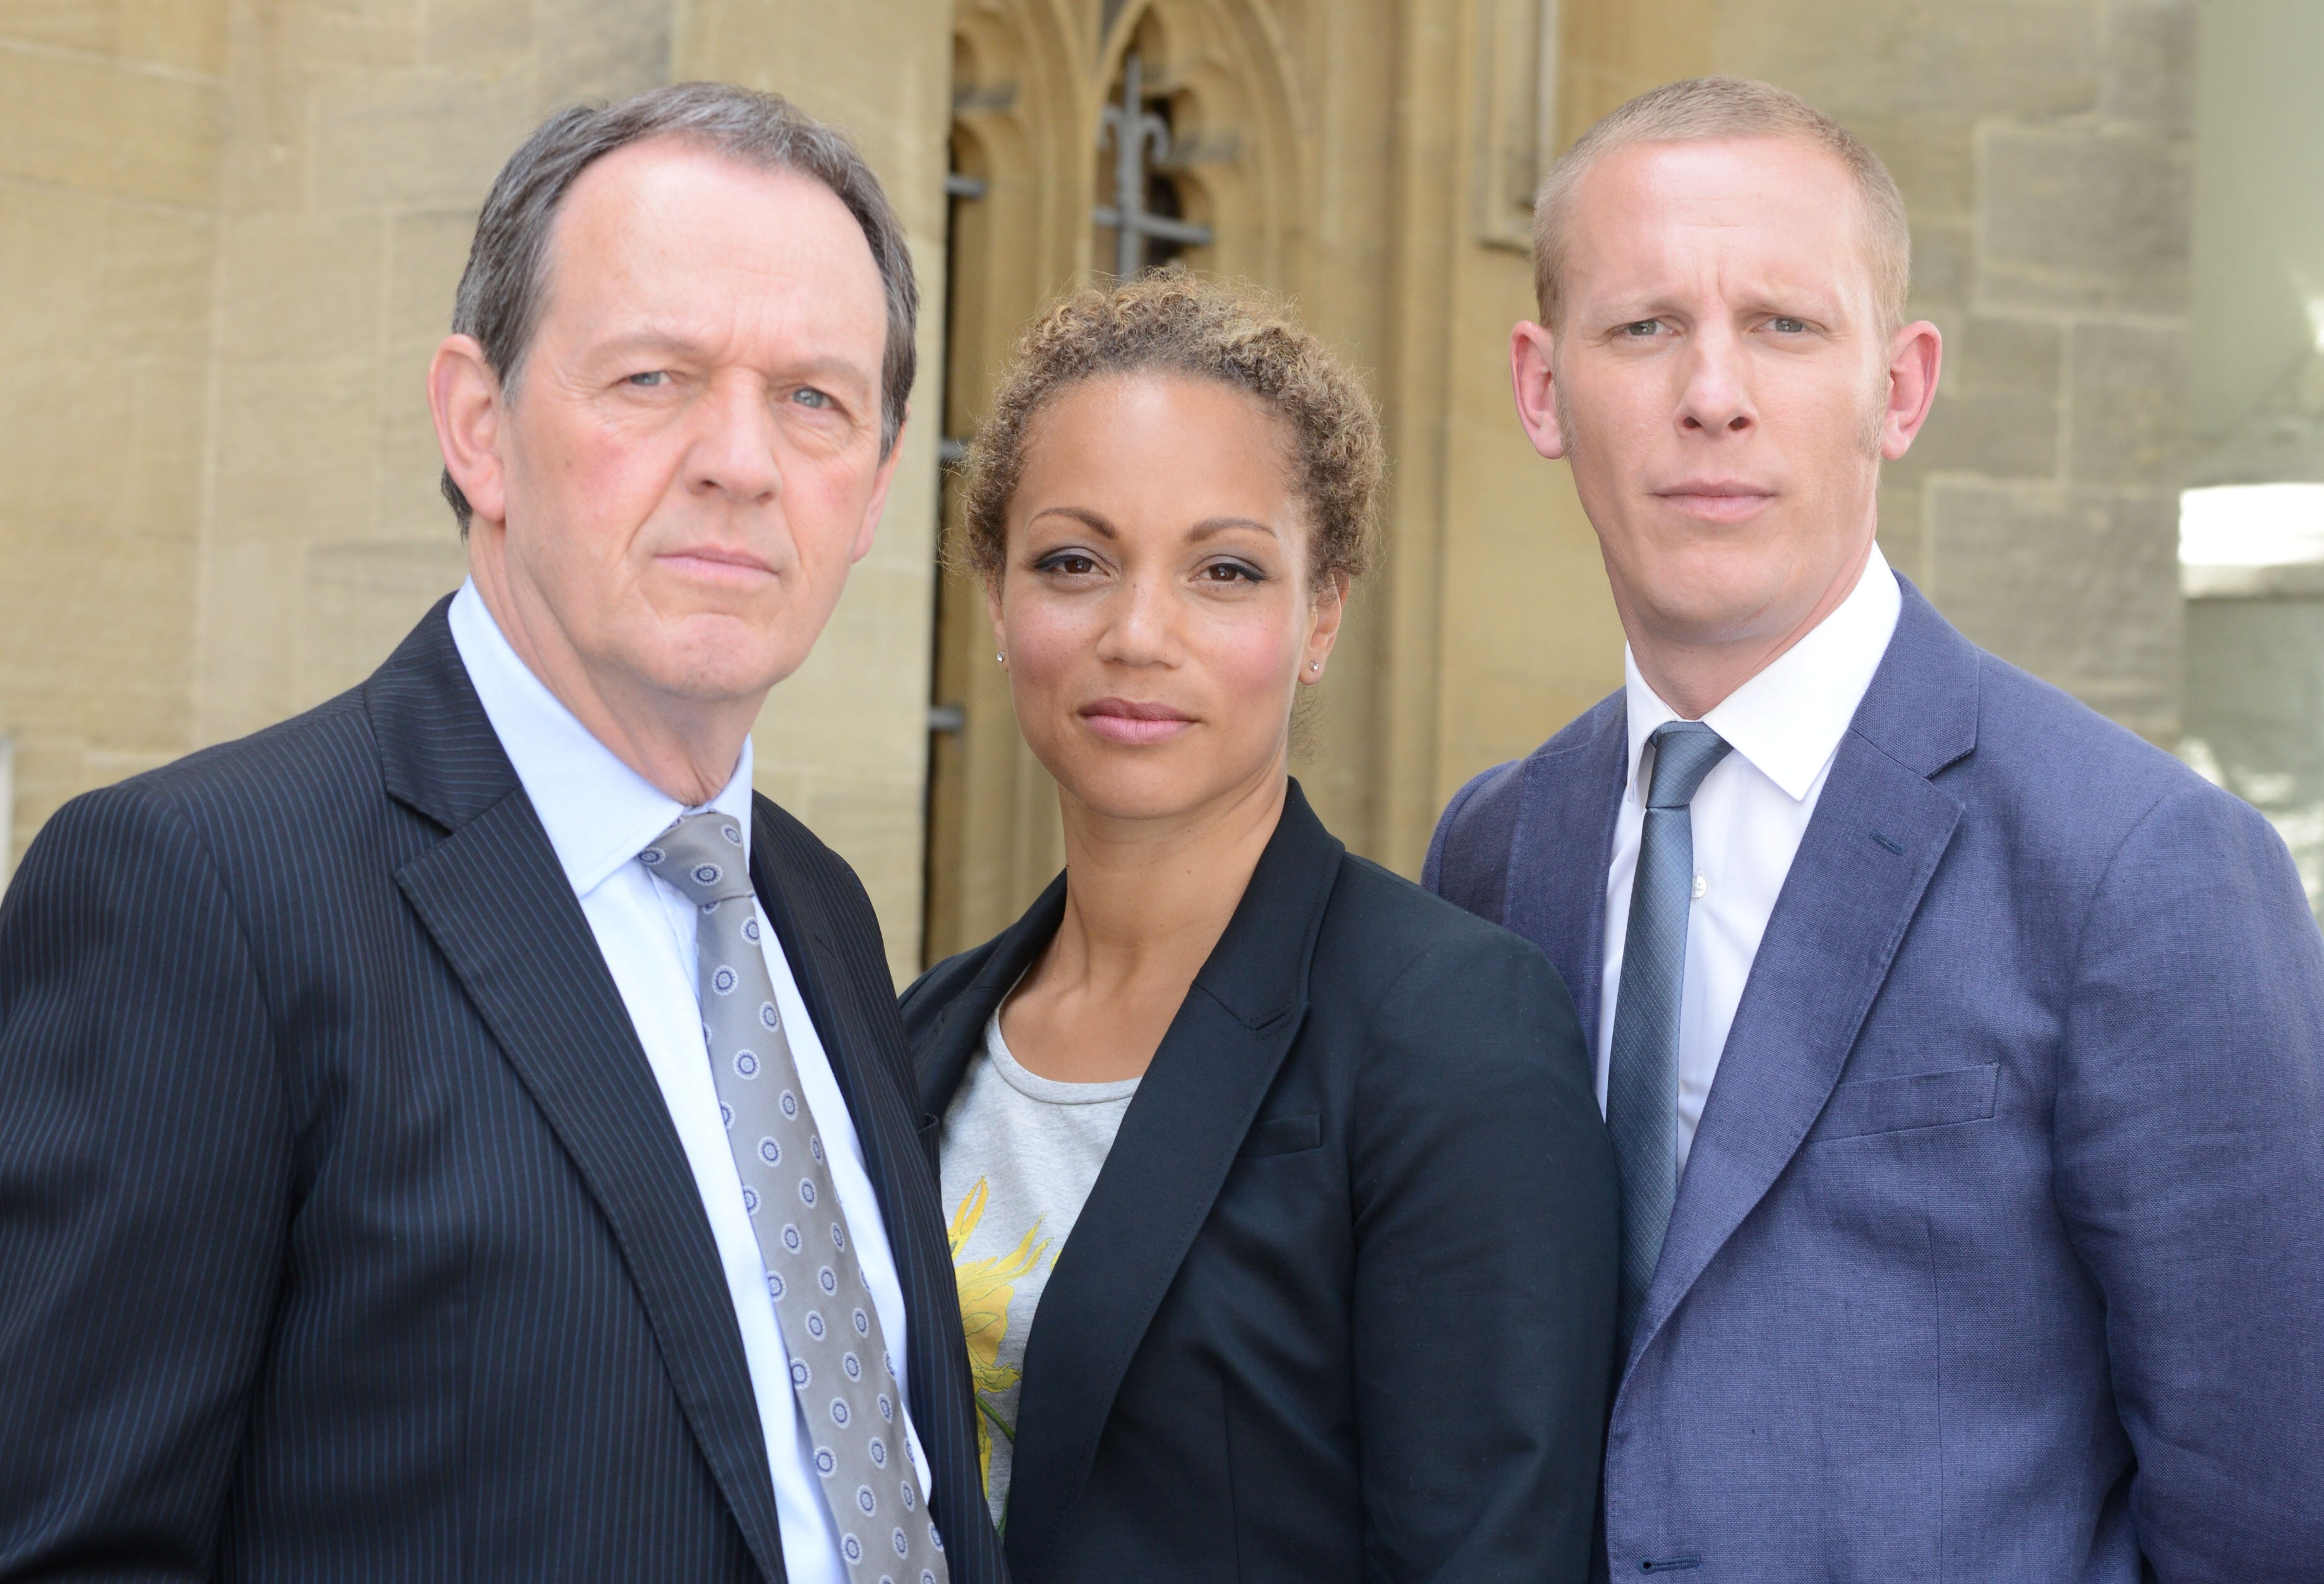 Kevin Whately, Angela Griffin and Laurence Fox in Series 7. (Photo: Courtesy of (C) ITV Studios for MASTERPIECE)